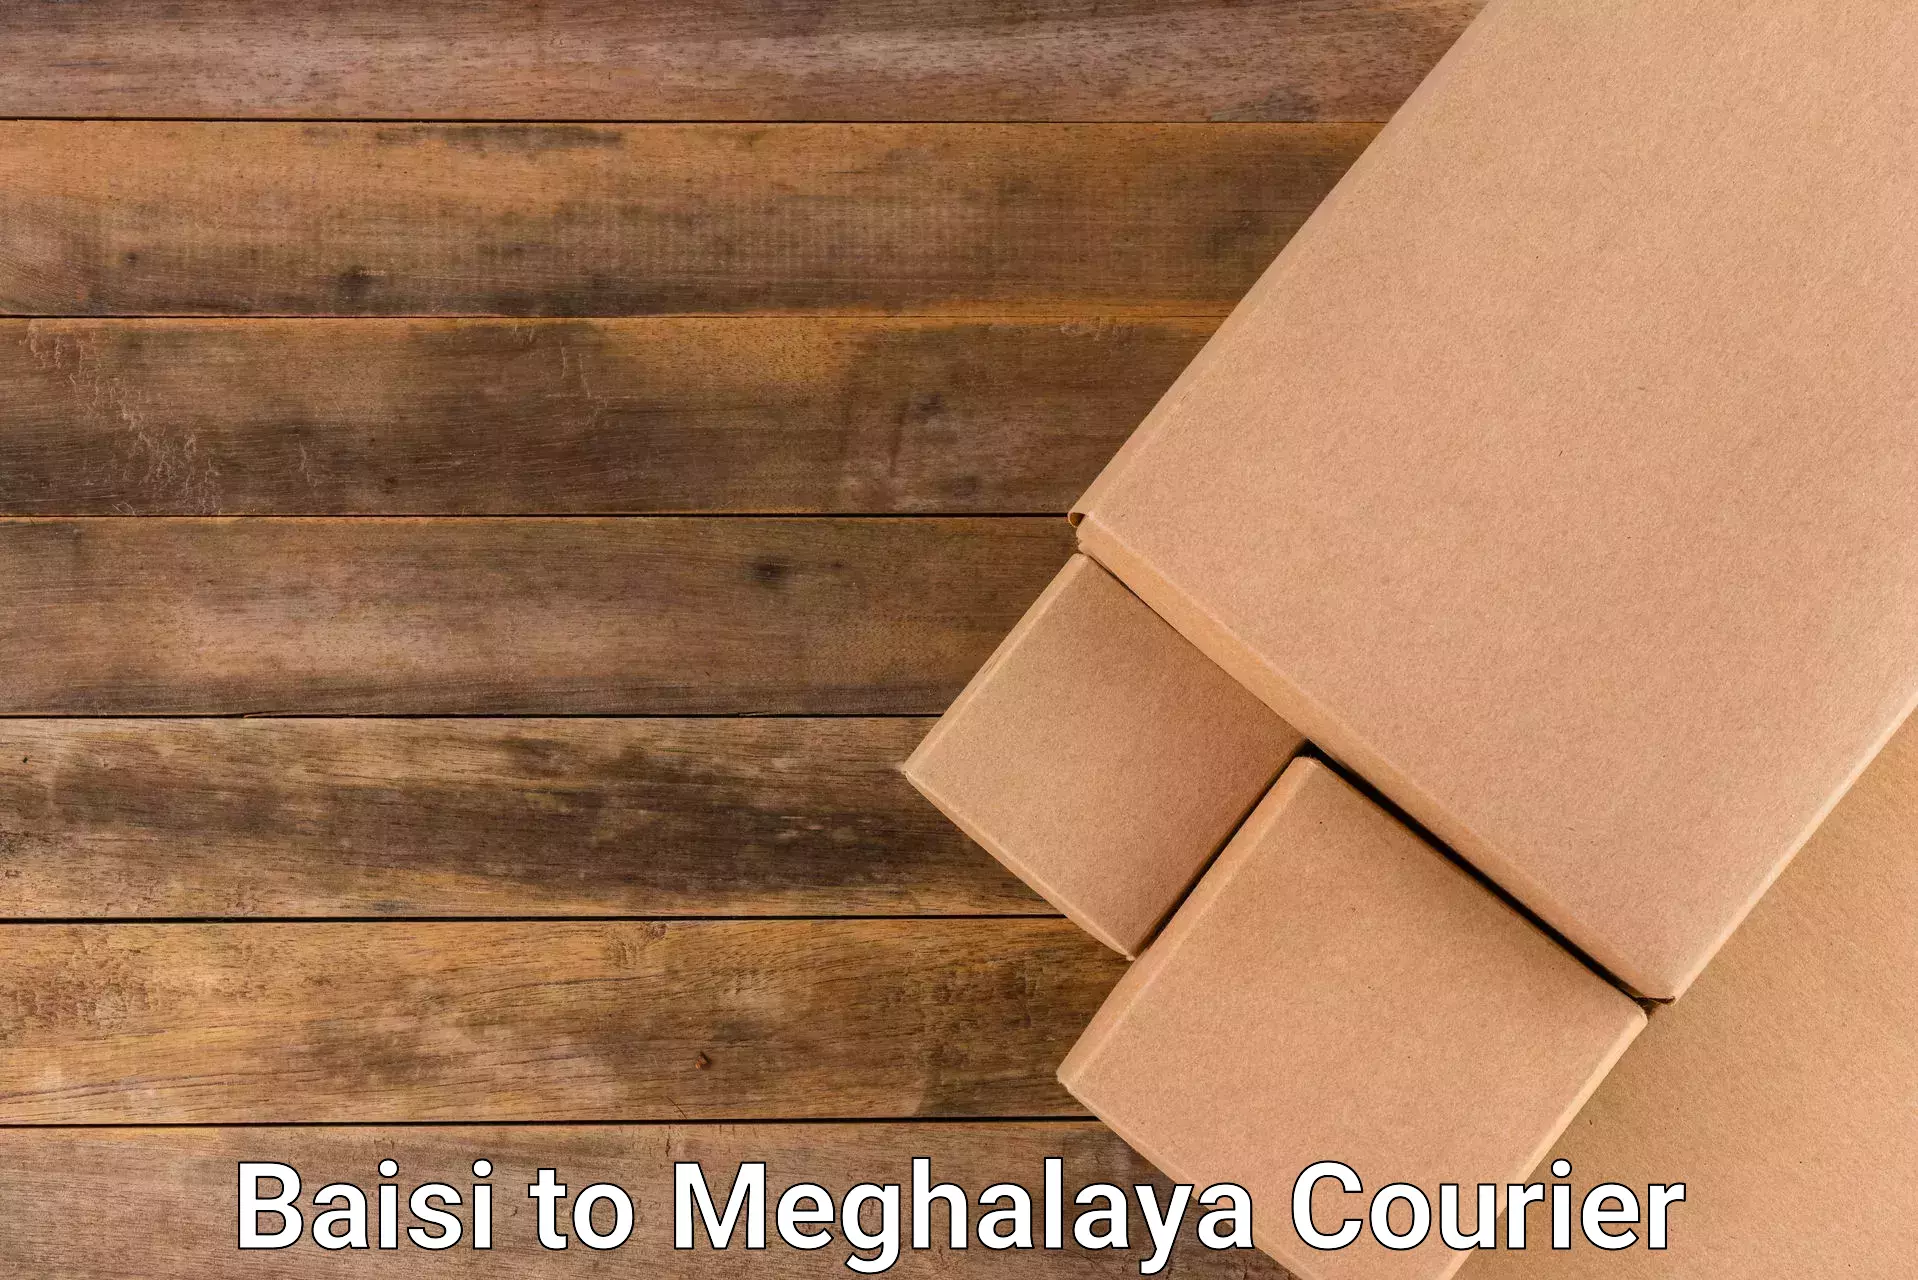 Courier service booking Baisi to Meghalaya